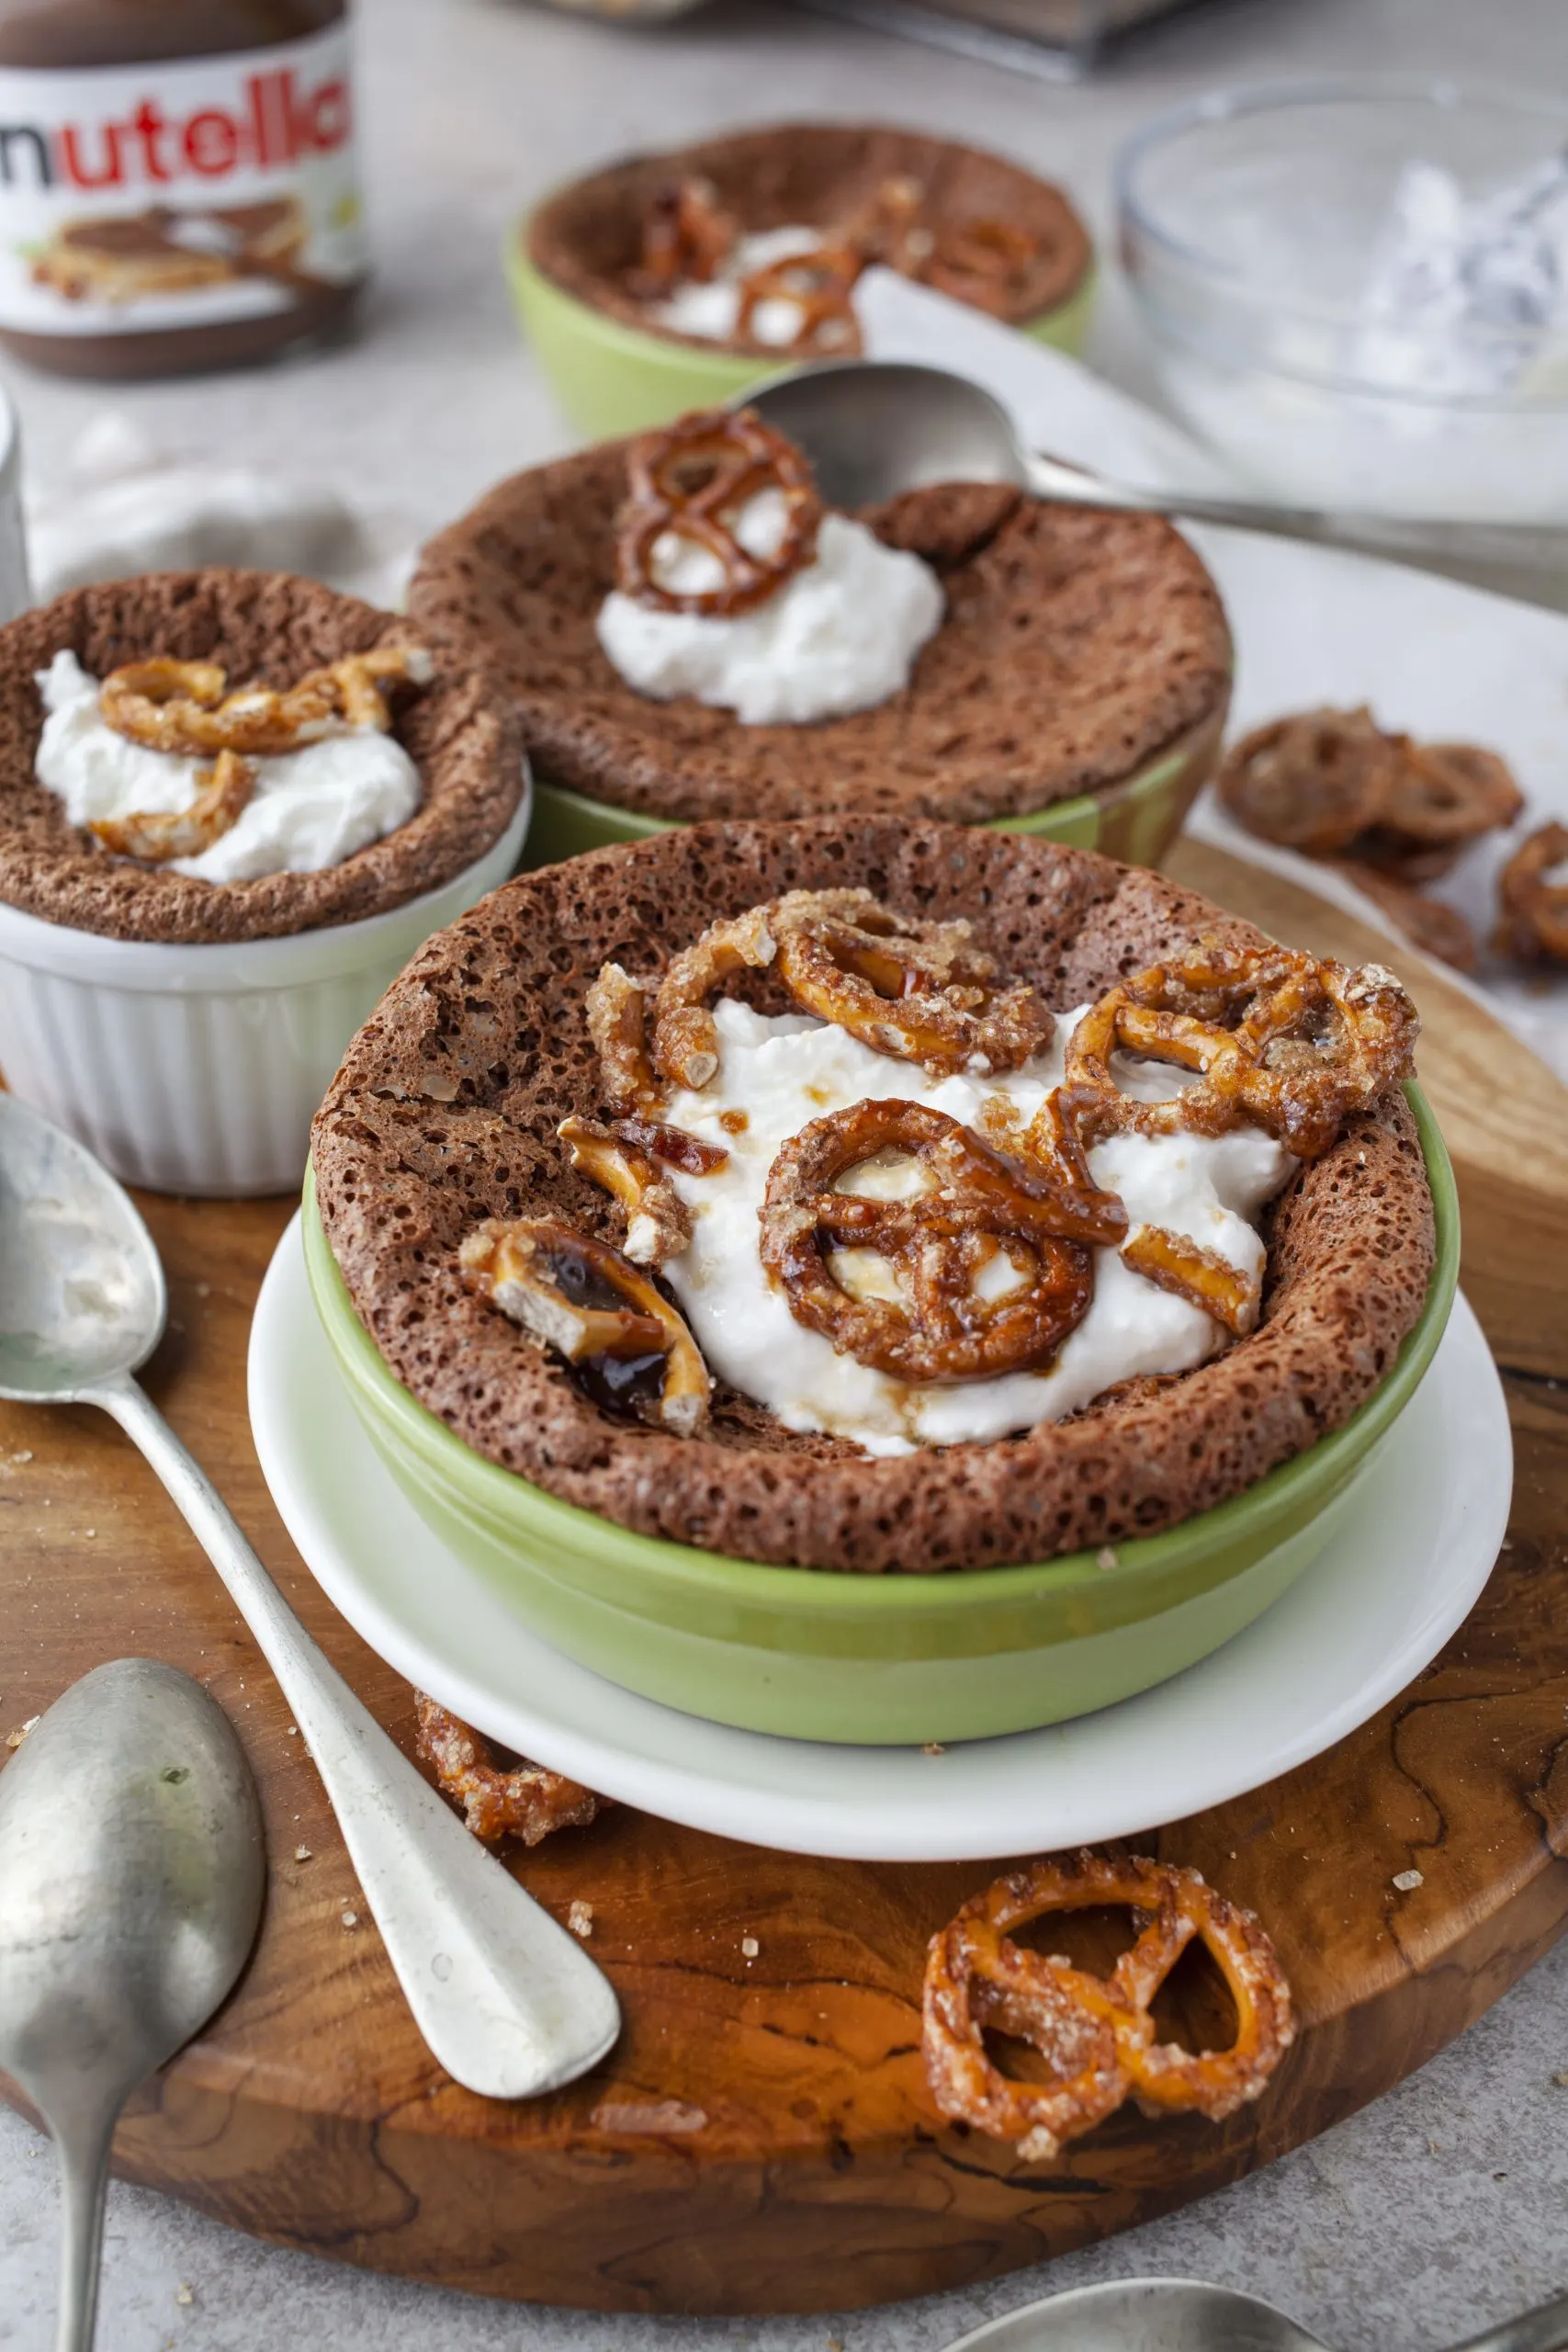 Nutella pudding with salty pretzels recipe